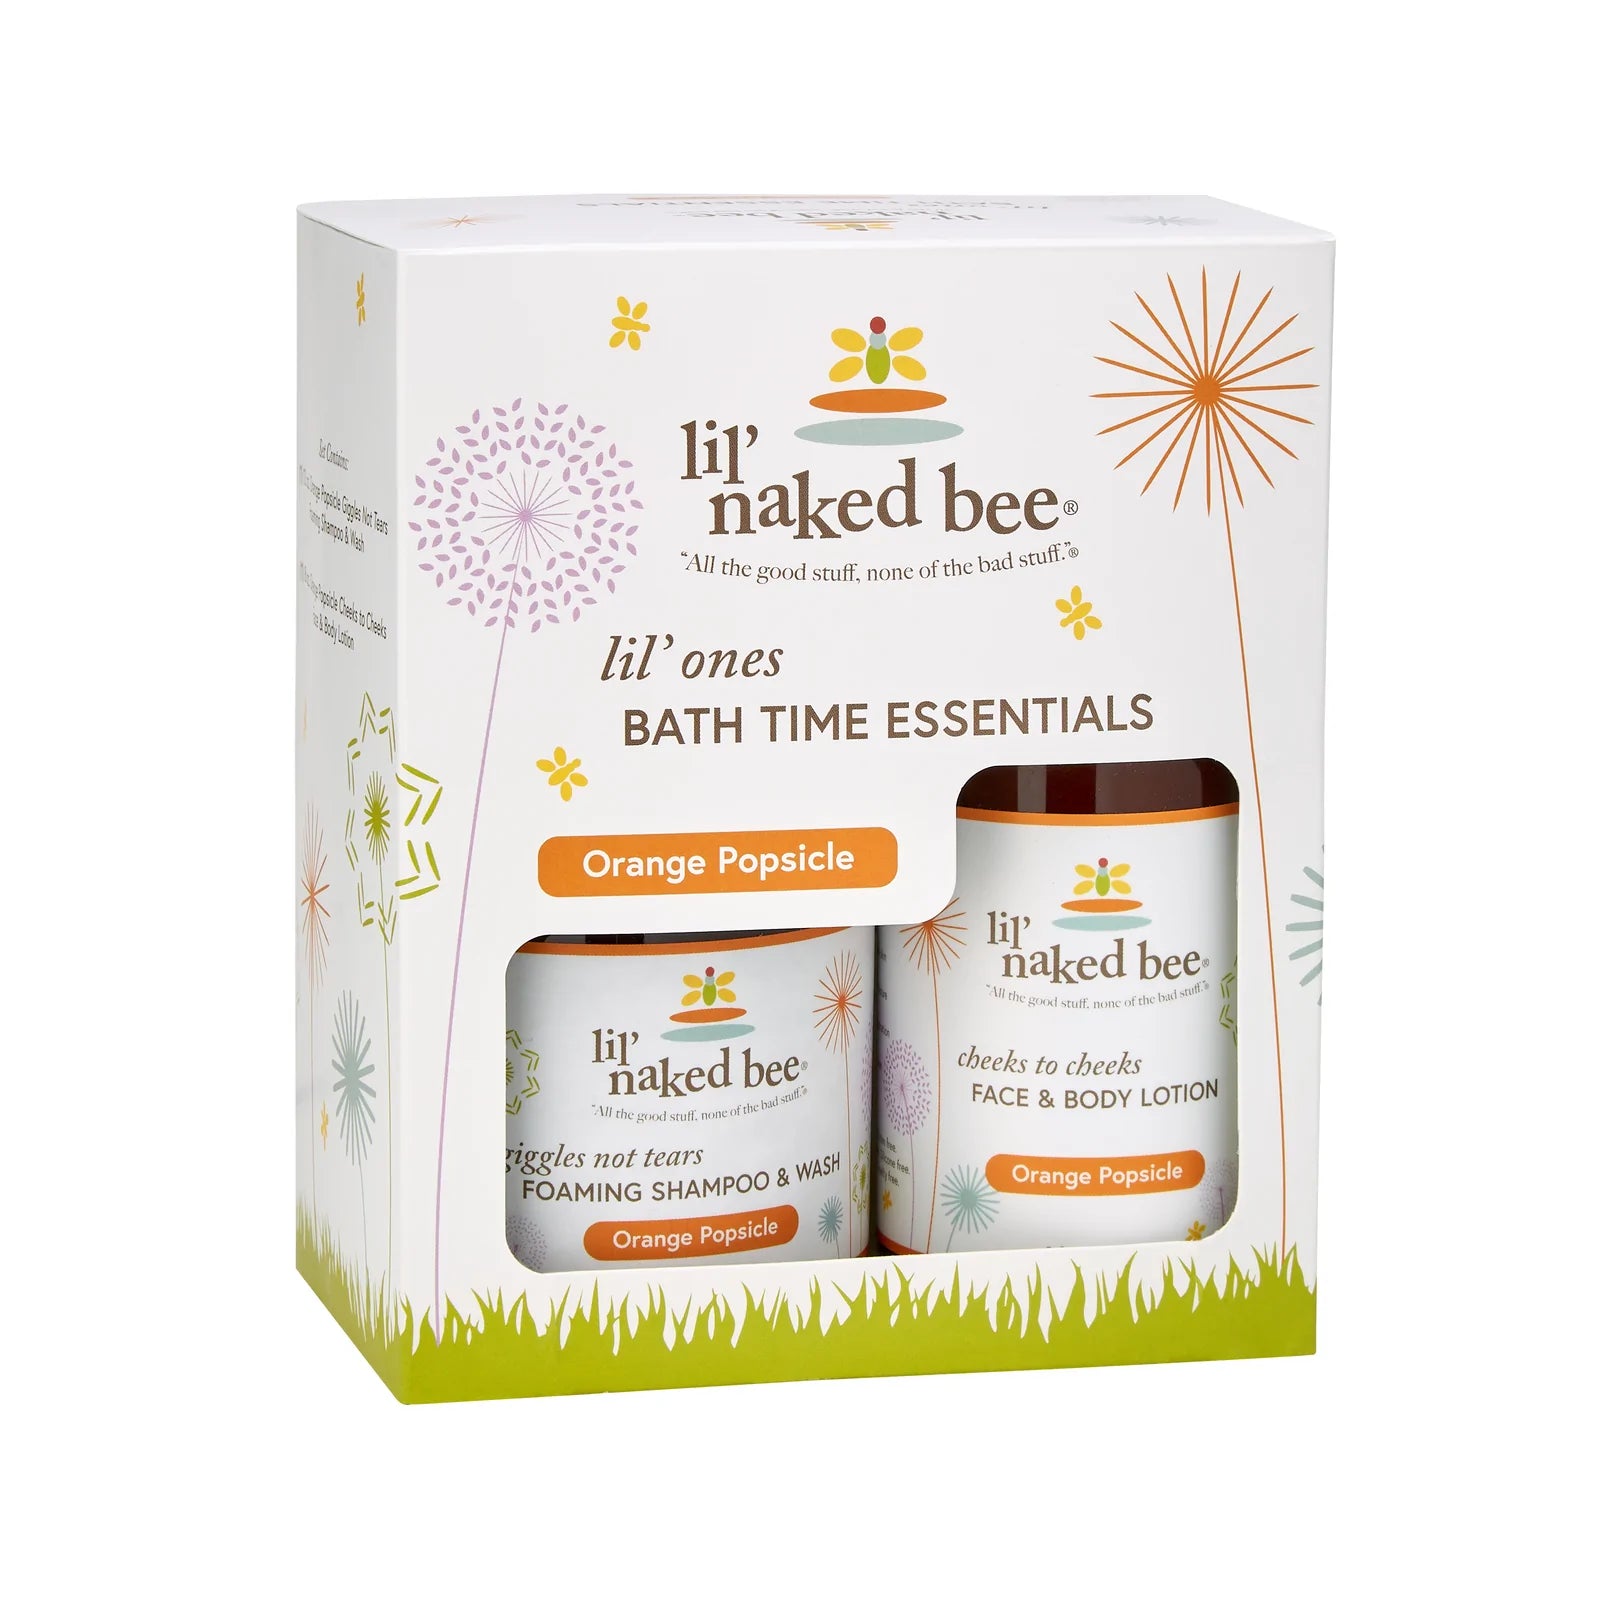 The Naked Bee Lil' Ones Bath Time Gift Set